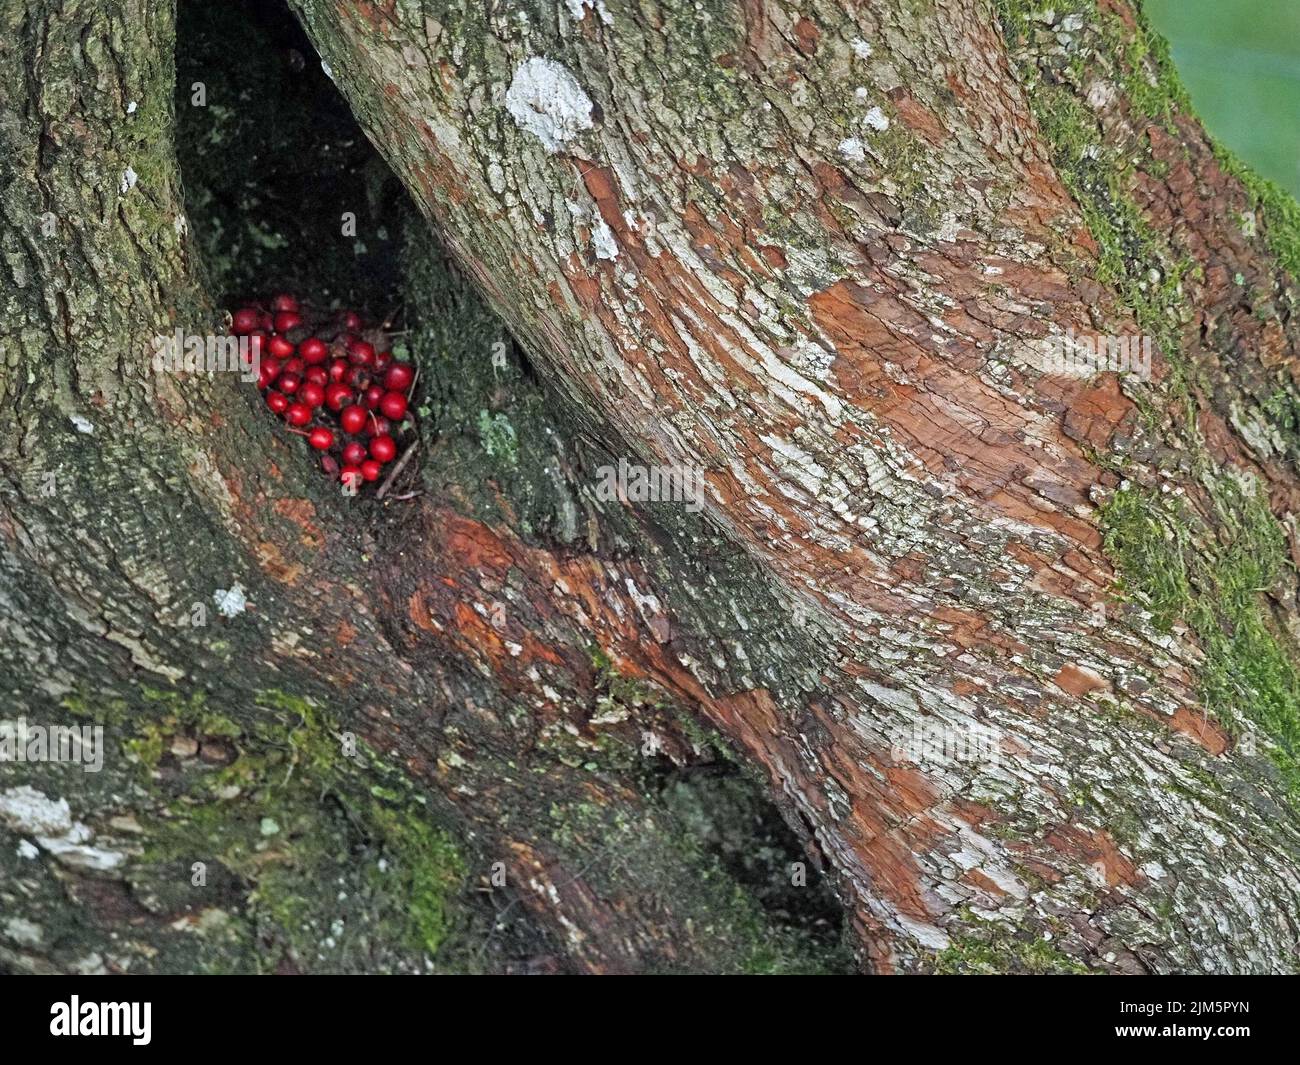 cache of berries or Haws in hollow in rugged sweeping trunk of ancient Hawthorn tree (Crataegus monogyna) in Cumbria,England,UK Stock Photo